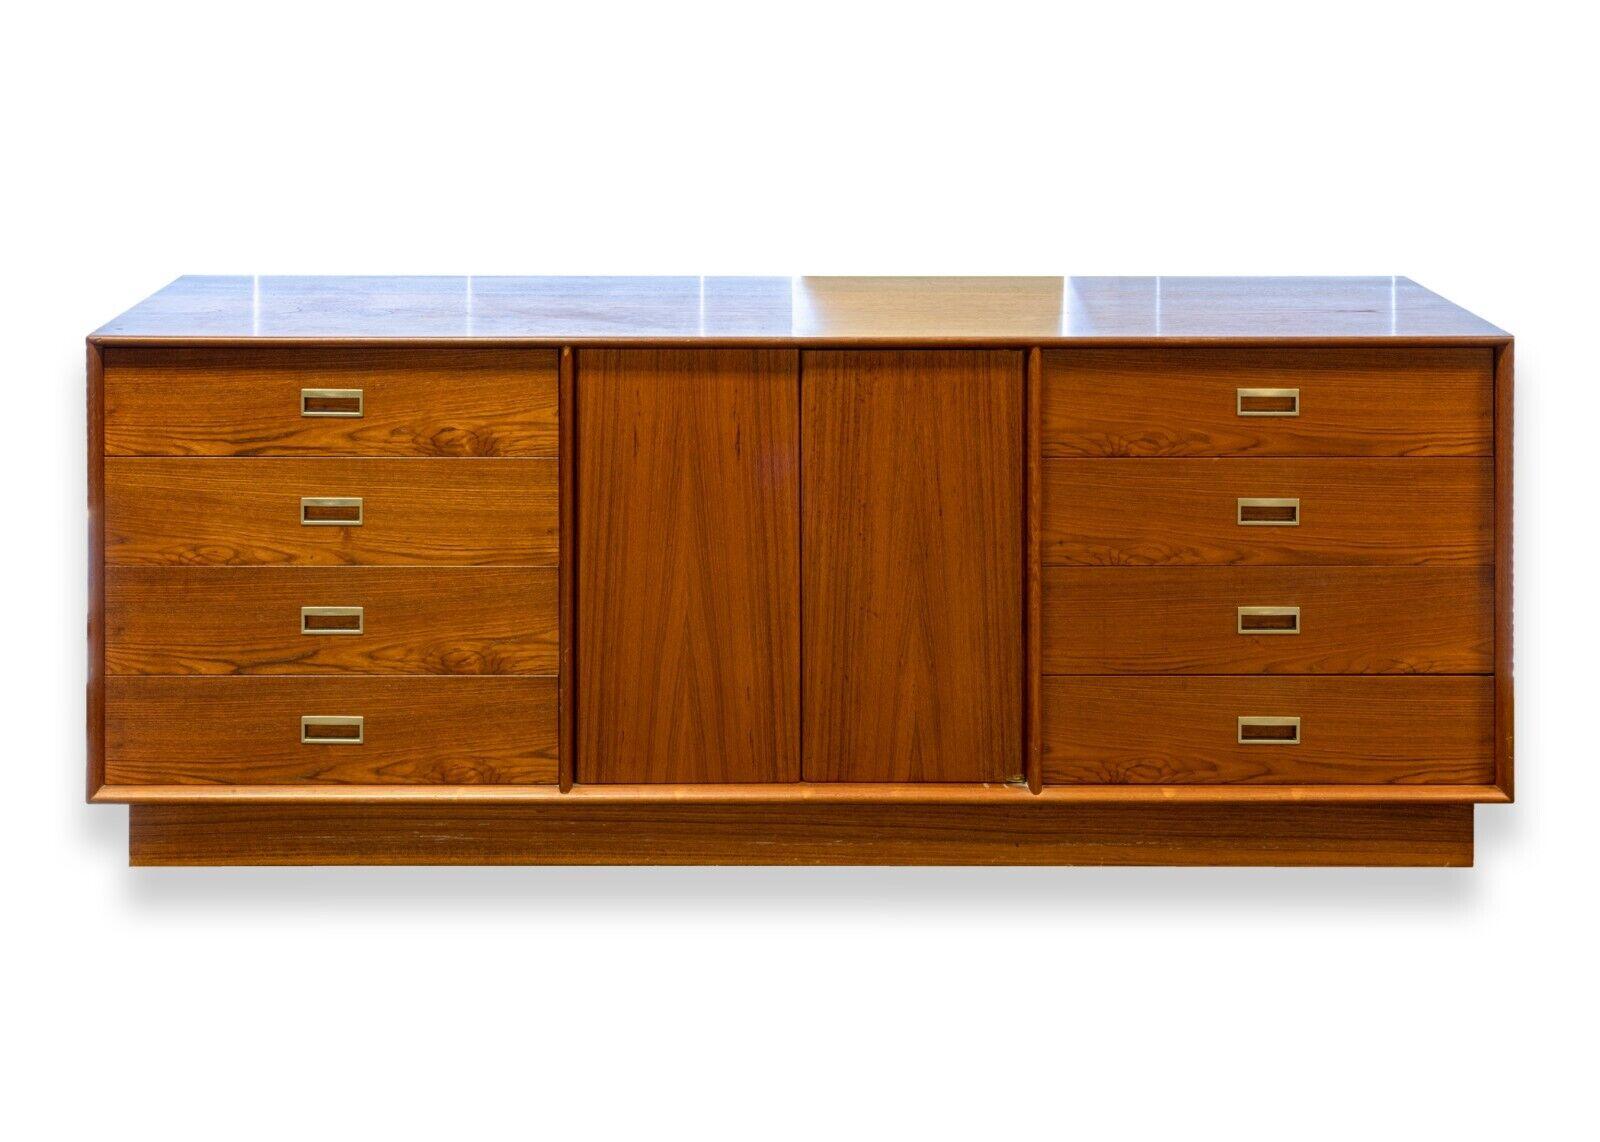 A mid century modern Danish teak wood bedroom set. An amazing bedroom set featuring a highboy dresser, a credenza, a pair of matching mirrors, and a queen headboard. The highboy dresser features 7 pull out drawers with brass handles. The credenza